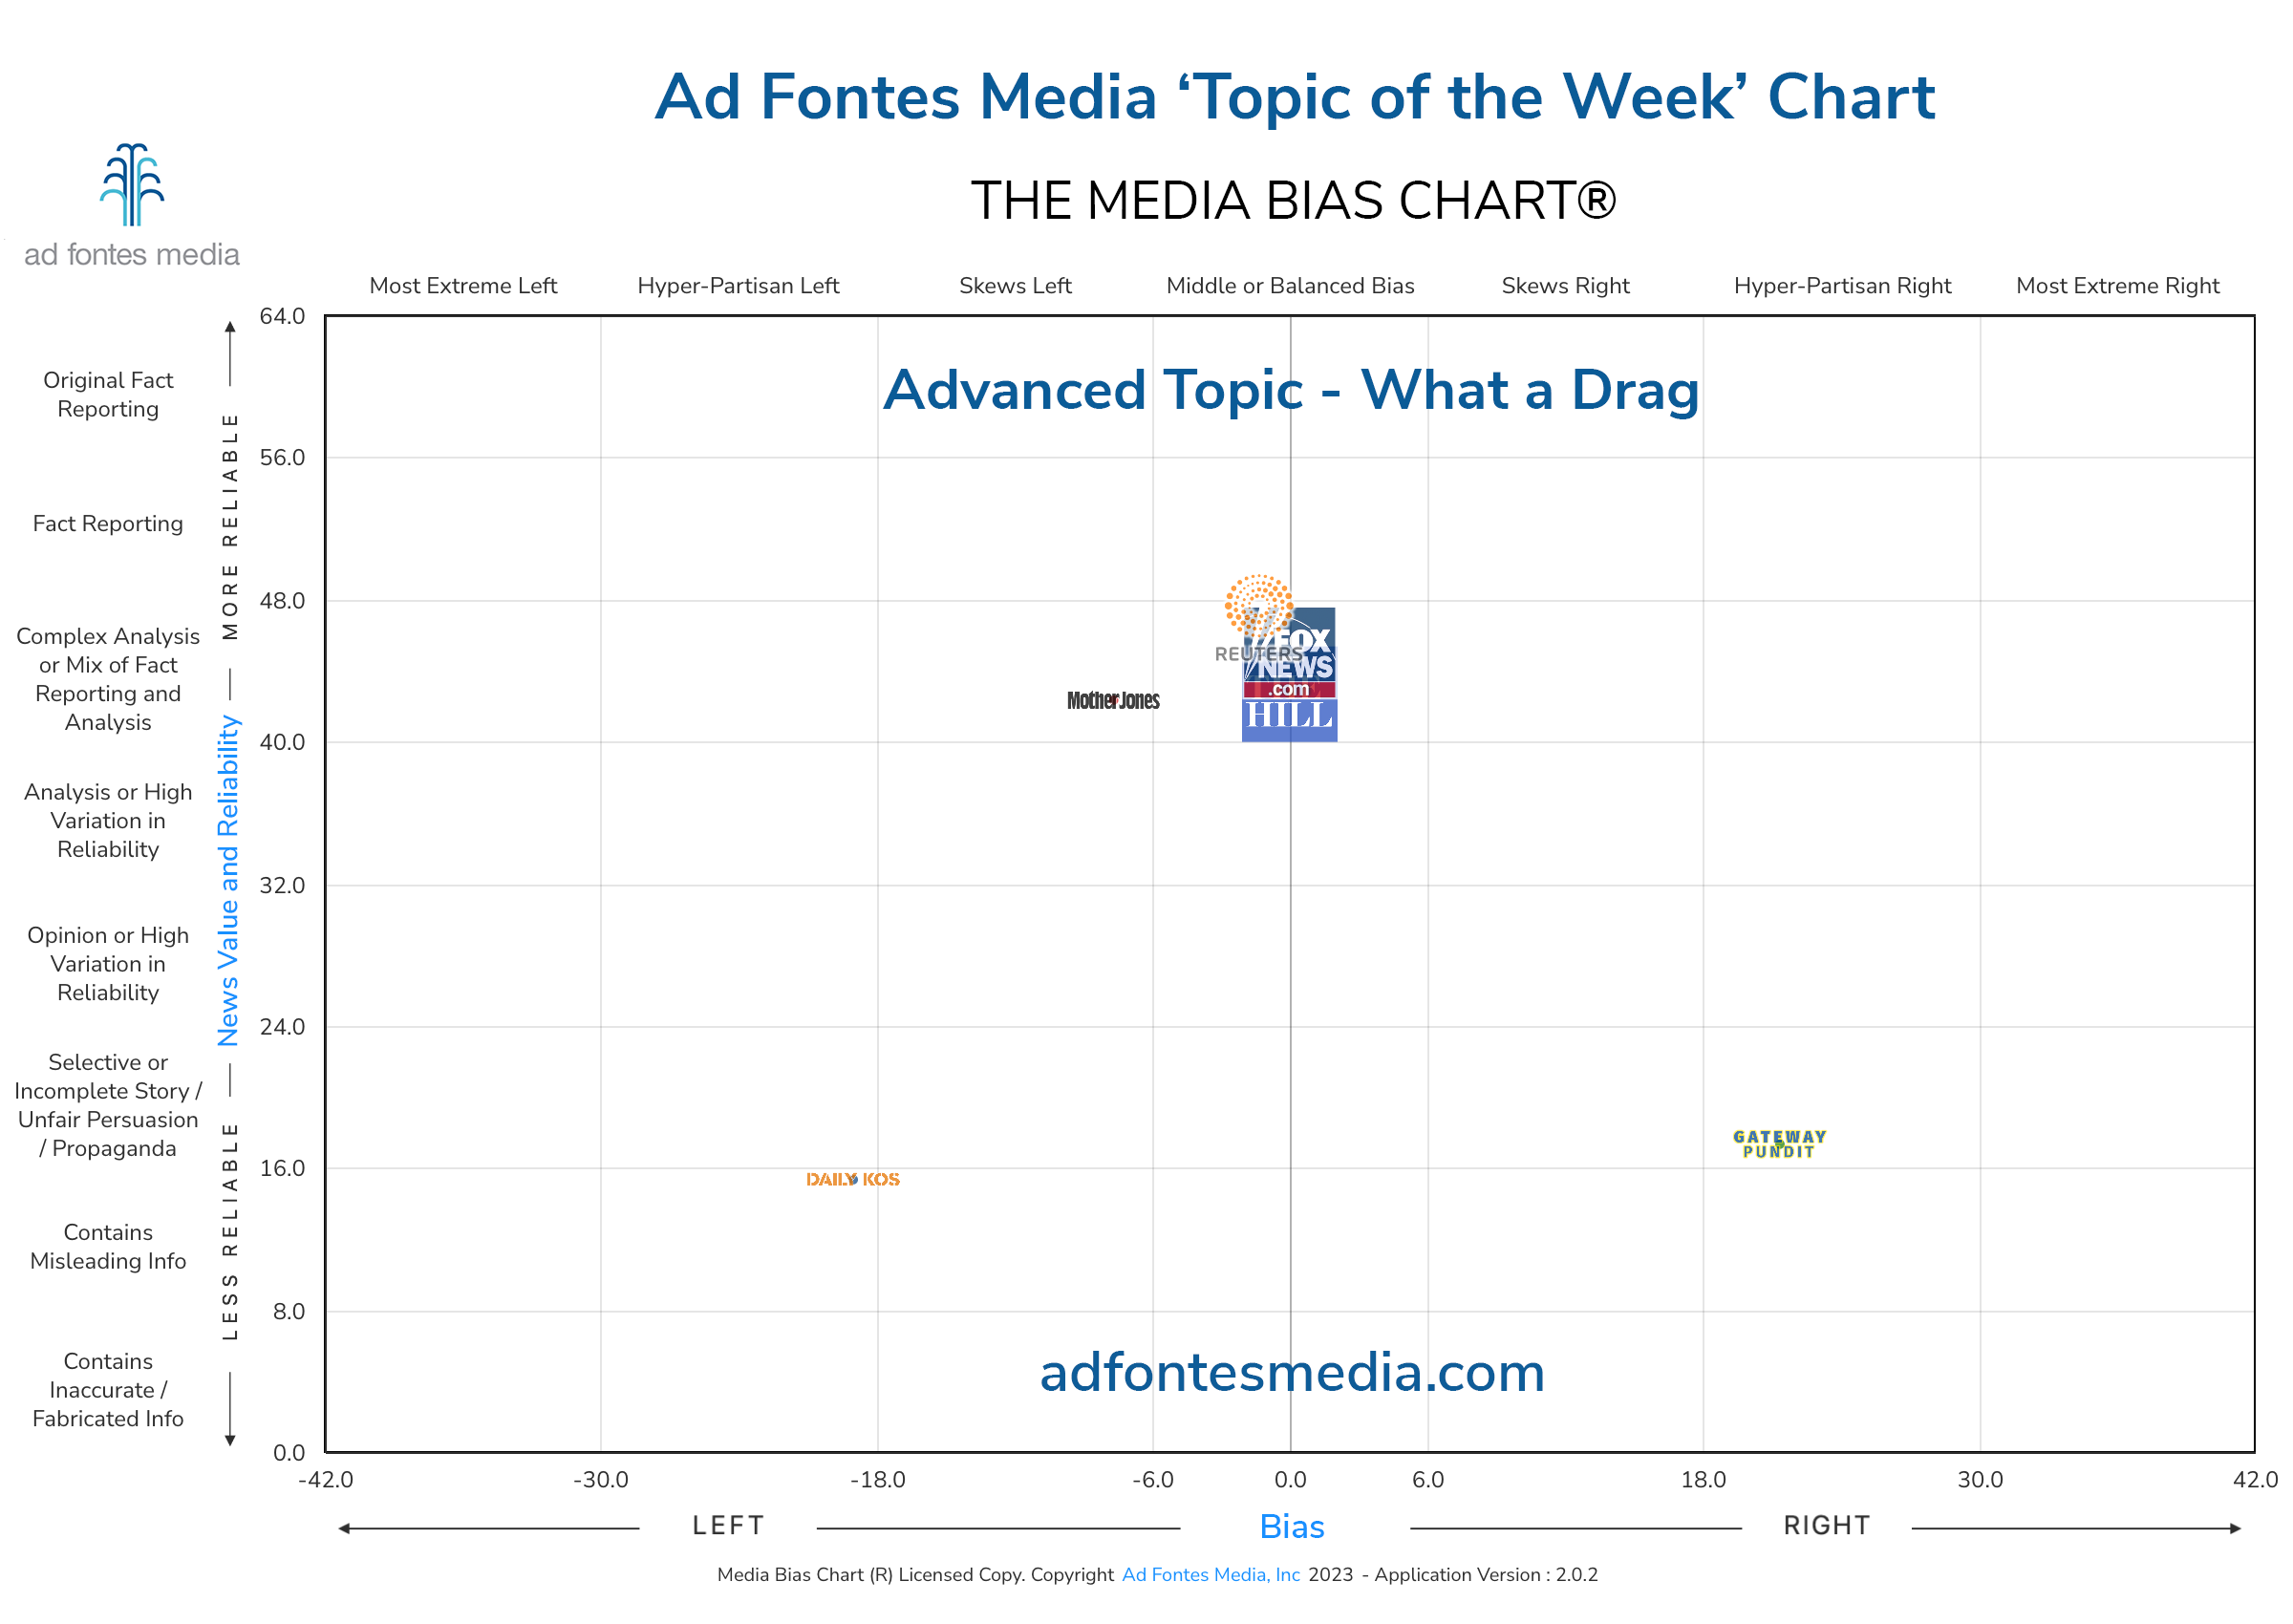 Scores of the What a Drag articles on the chart